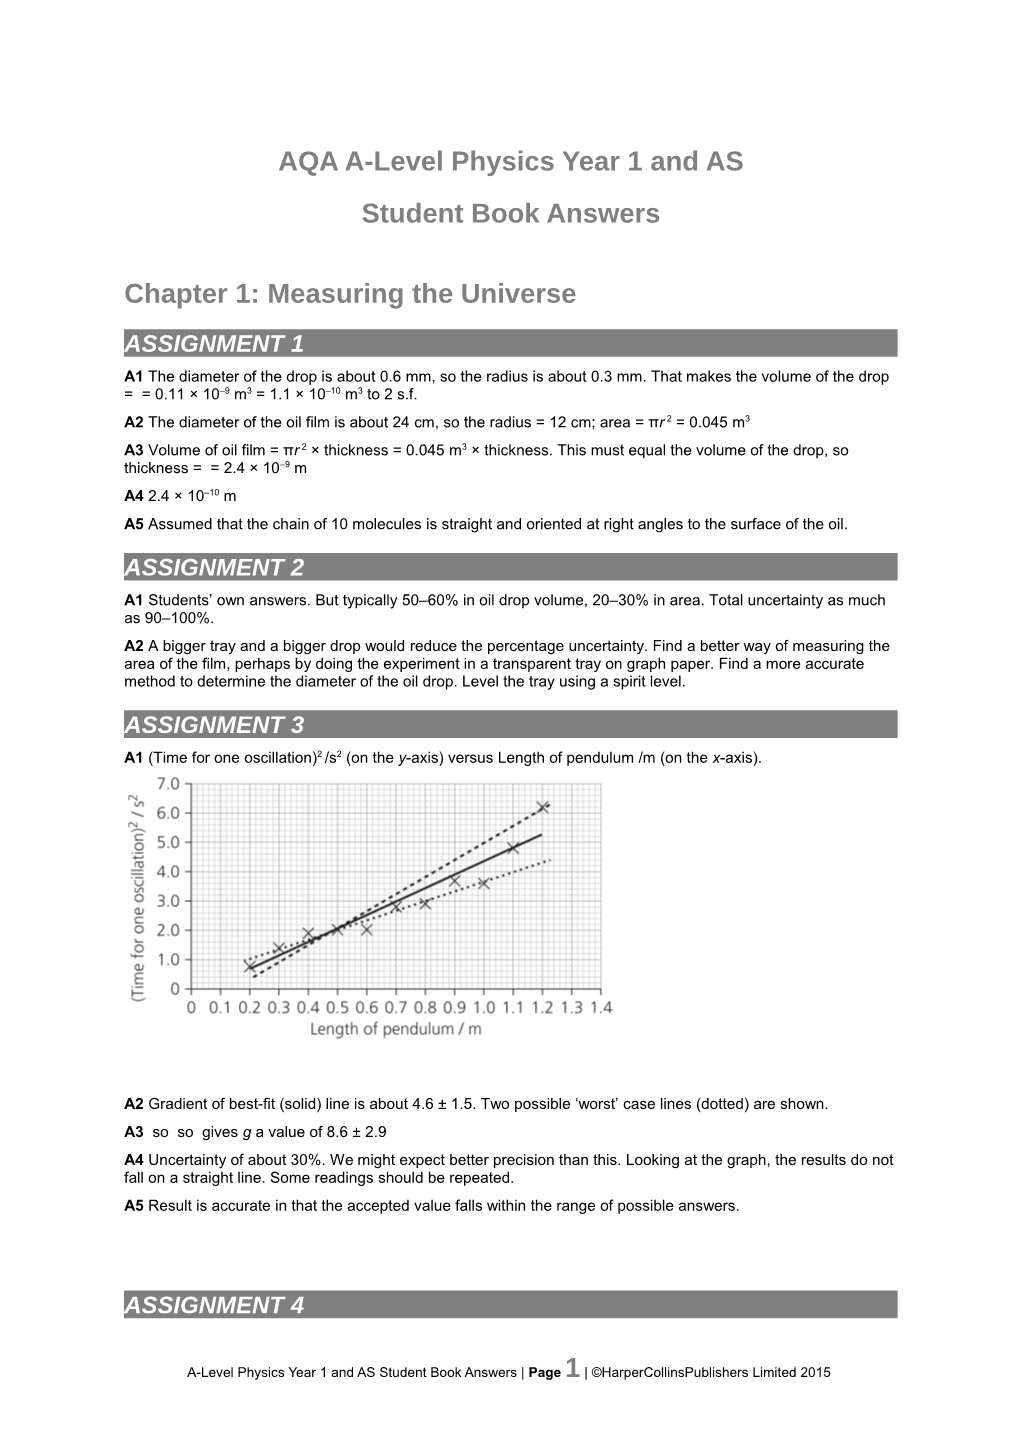 AQA A-Level Physics Year 1 and AS